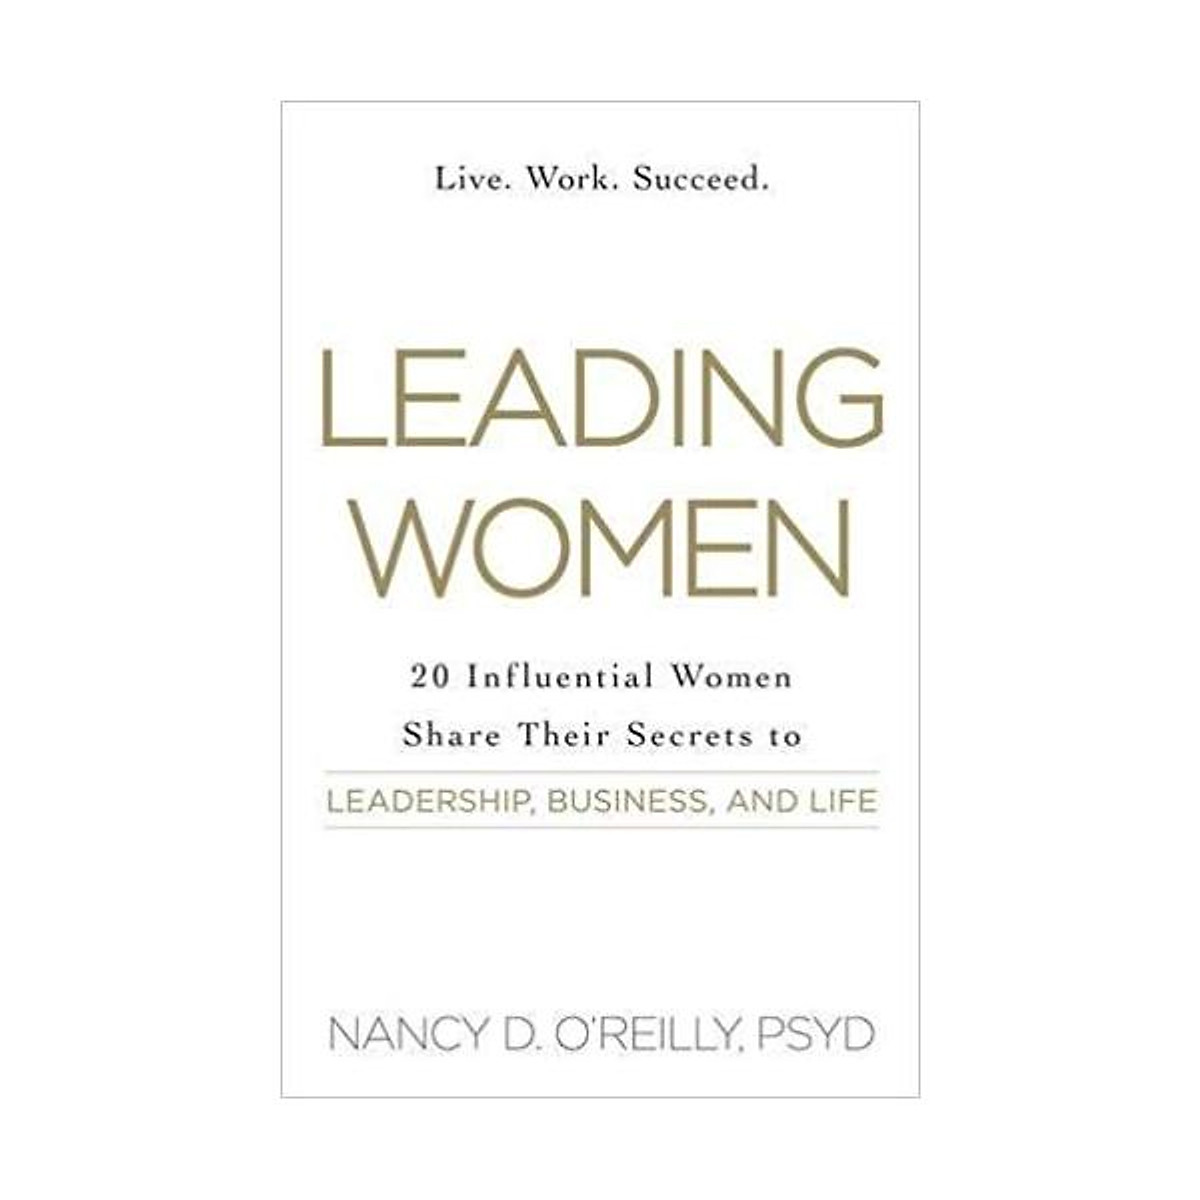 Leading Women: 20 Influential Women Share their Secrets to Leadership, Business, and Life